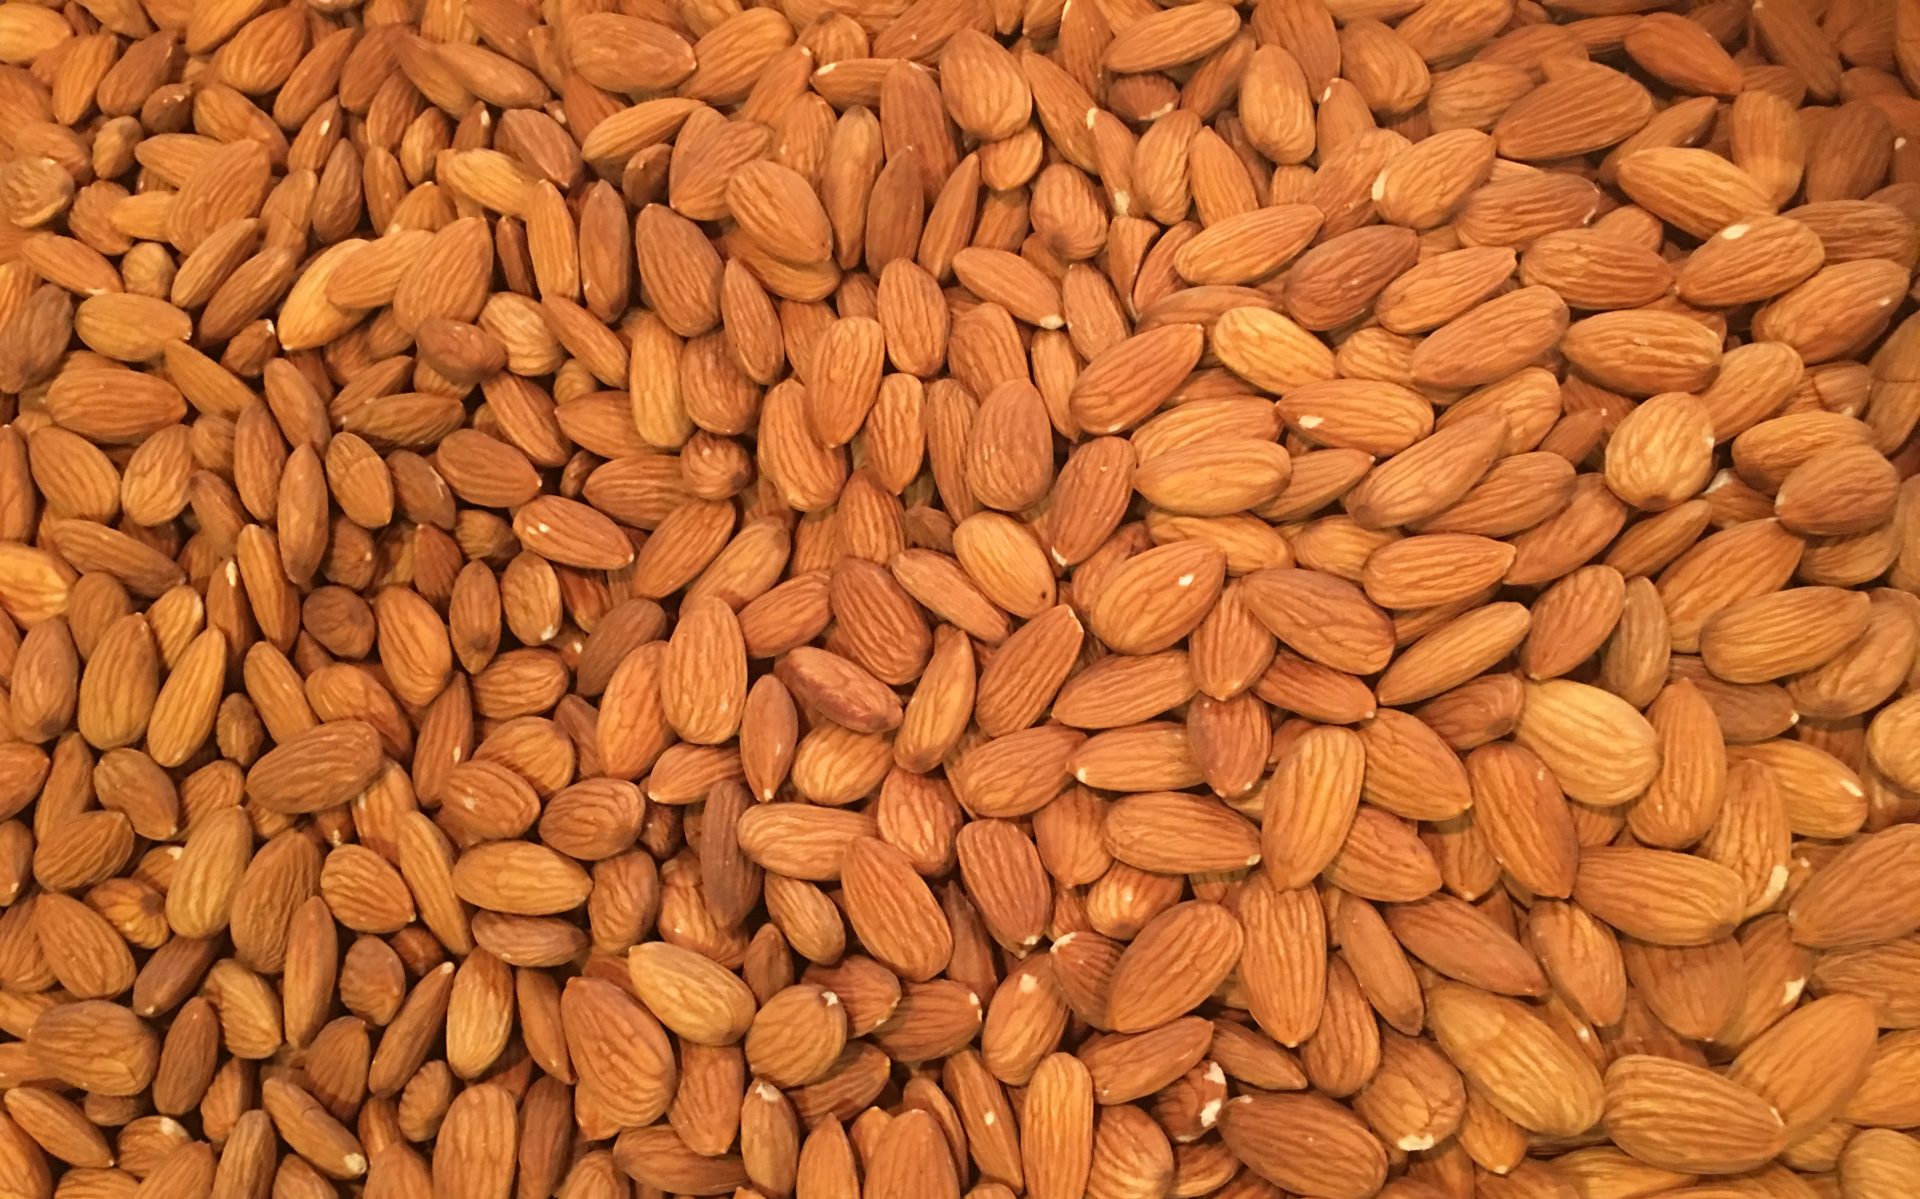 Organic Unpasteurized Almonds 5 Pounds- FREE SHIPPING!